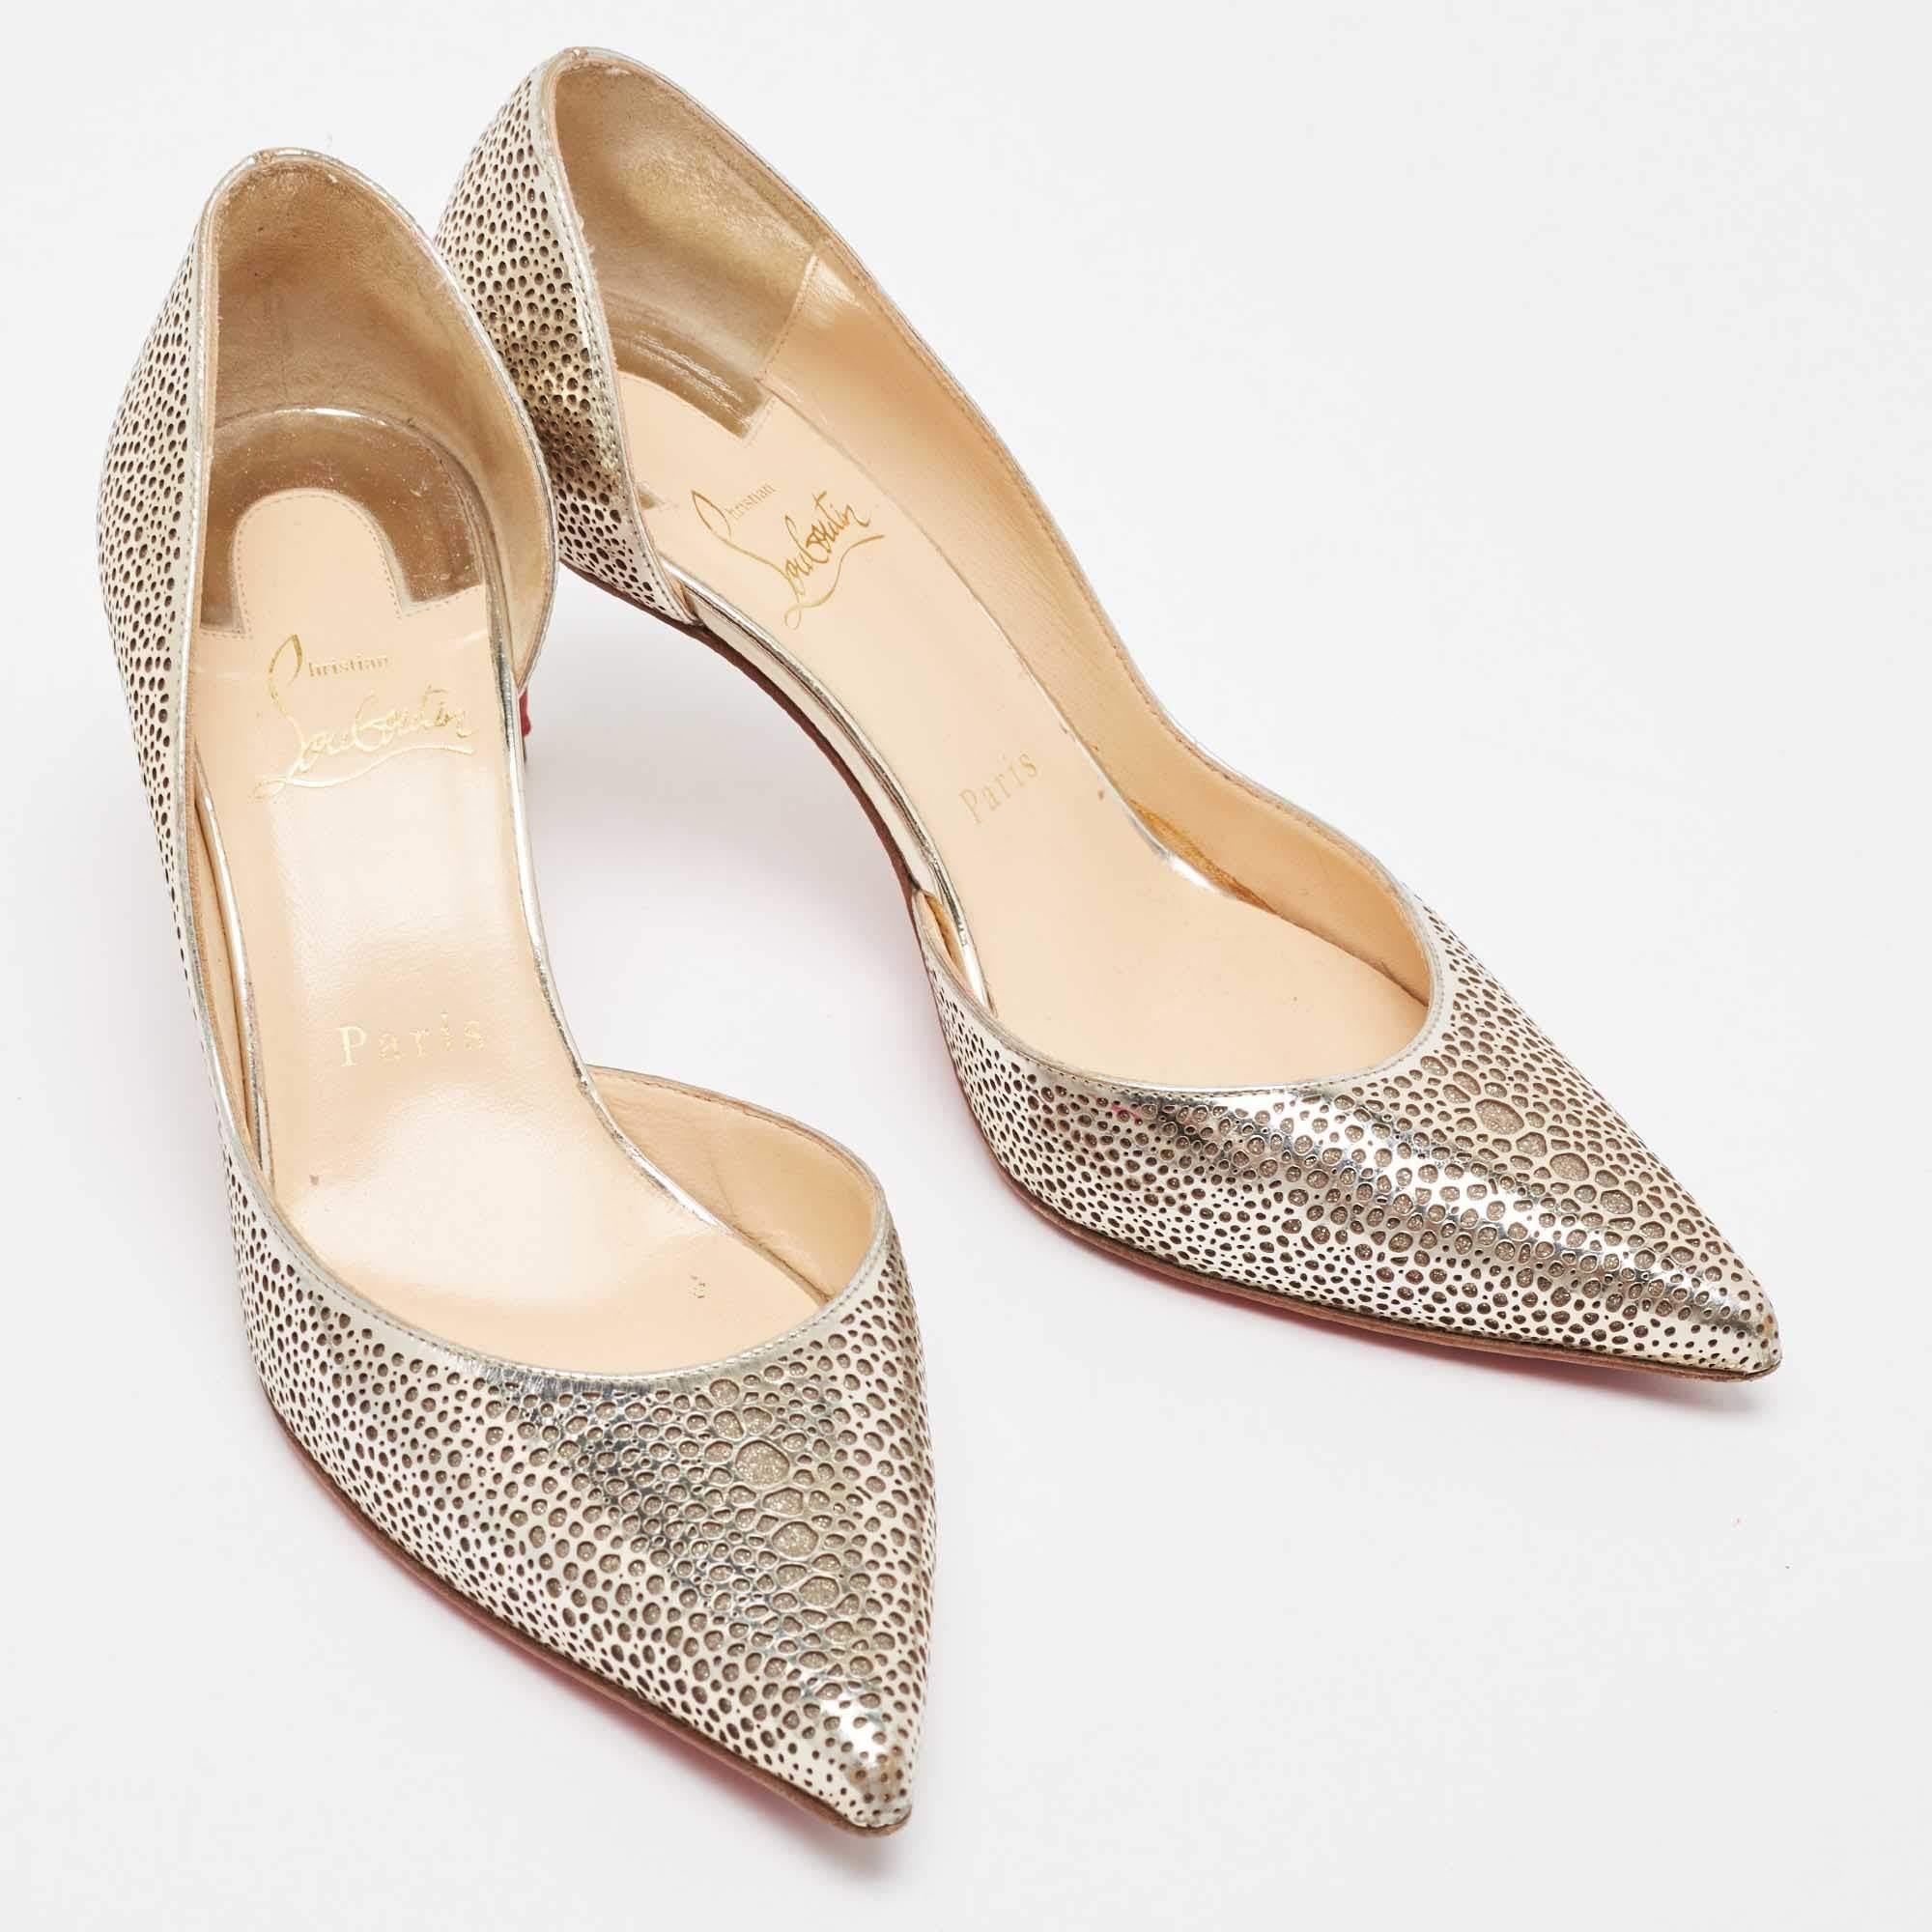 Christian Louboutin Gold Laser Cut Leather and Glitter Galu D'orsay Pumps Size 3 In Fair Condition For Sale In Dubai, Al Qouz 2